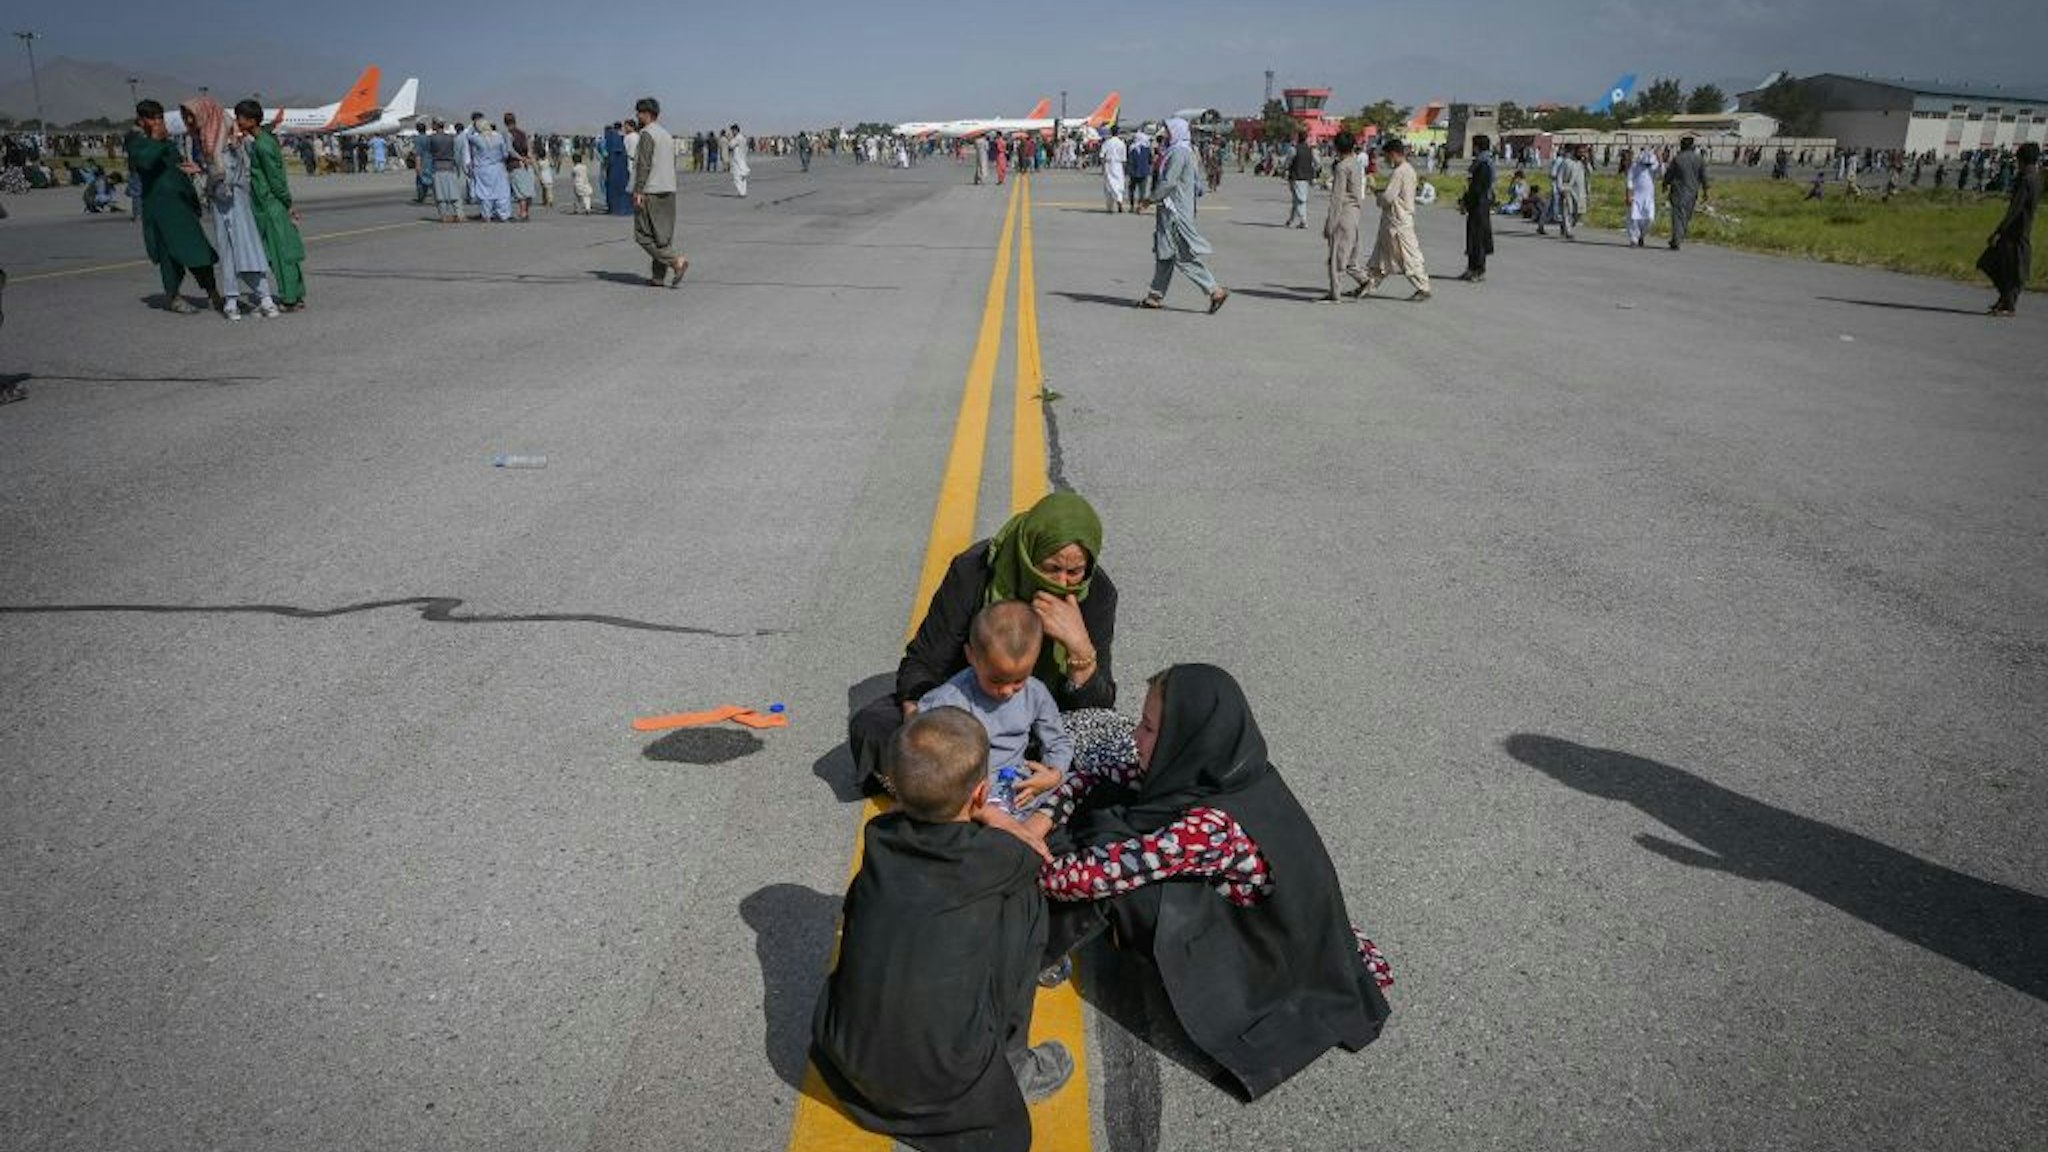 Afghan people sit along the tarmac as they wait to leave the Kabul airport in Kabul on August 16, 2021, after a stunningly swift end to Afghanistan's 20-year war, as thousands of people mobbed the city's airport trying to flee the group's feared hardline brand of Islamist rule.